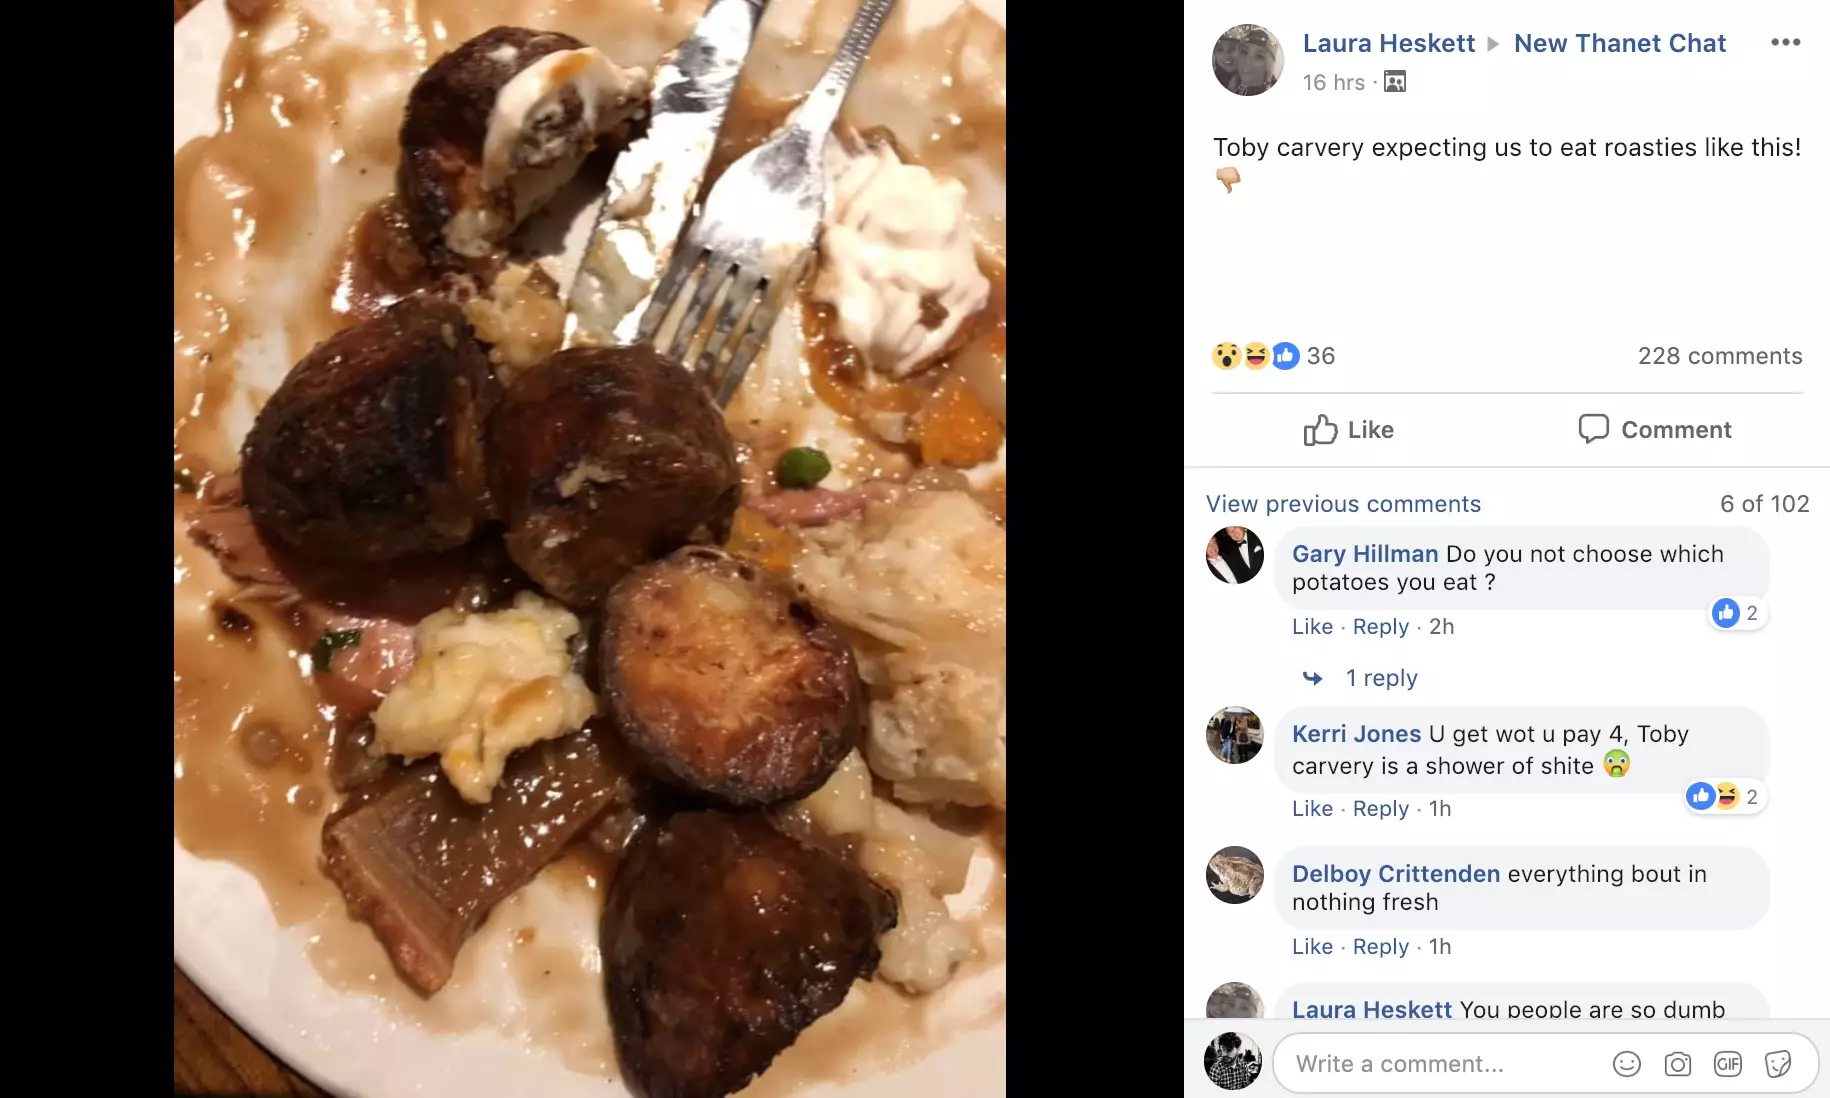 Laura was so disgusted with her meal she posted a photo on Facebook.